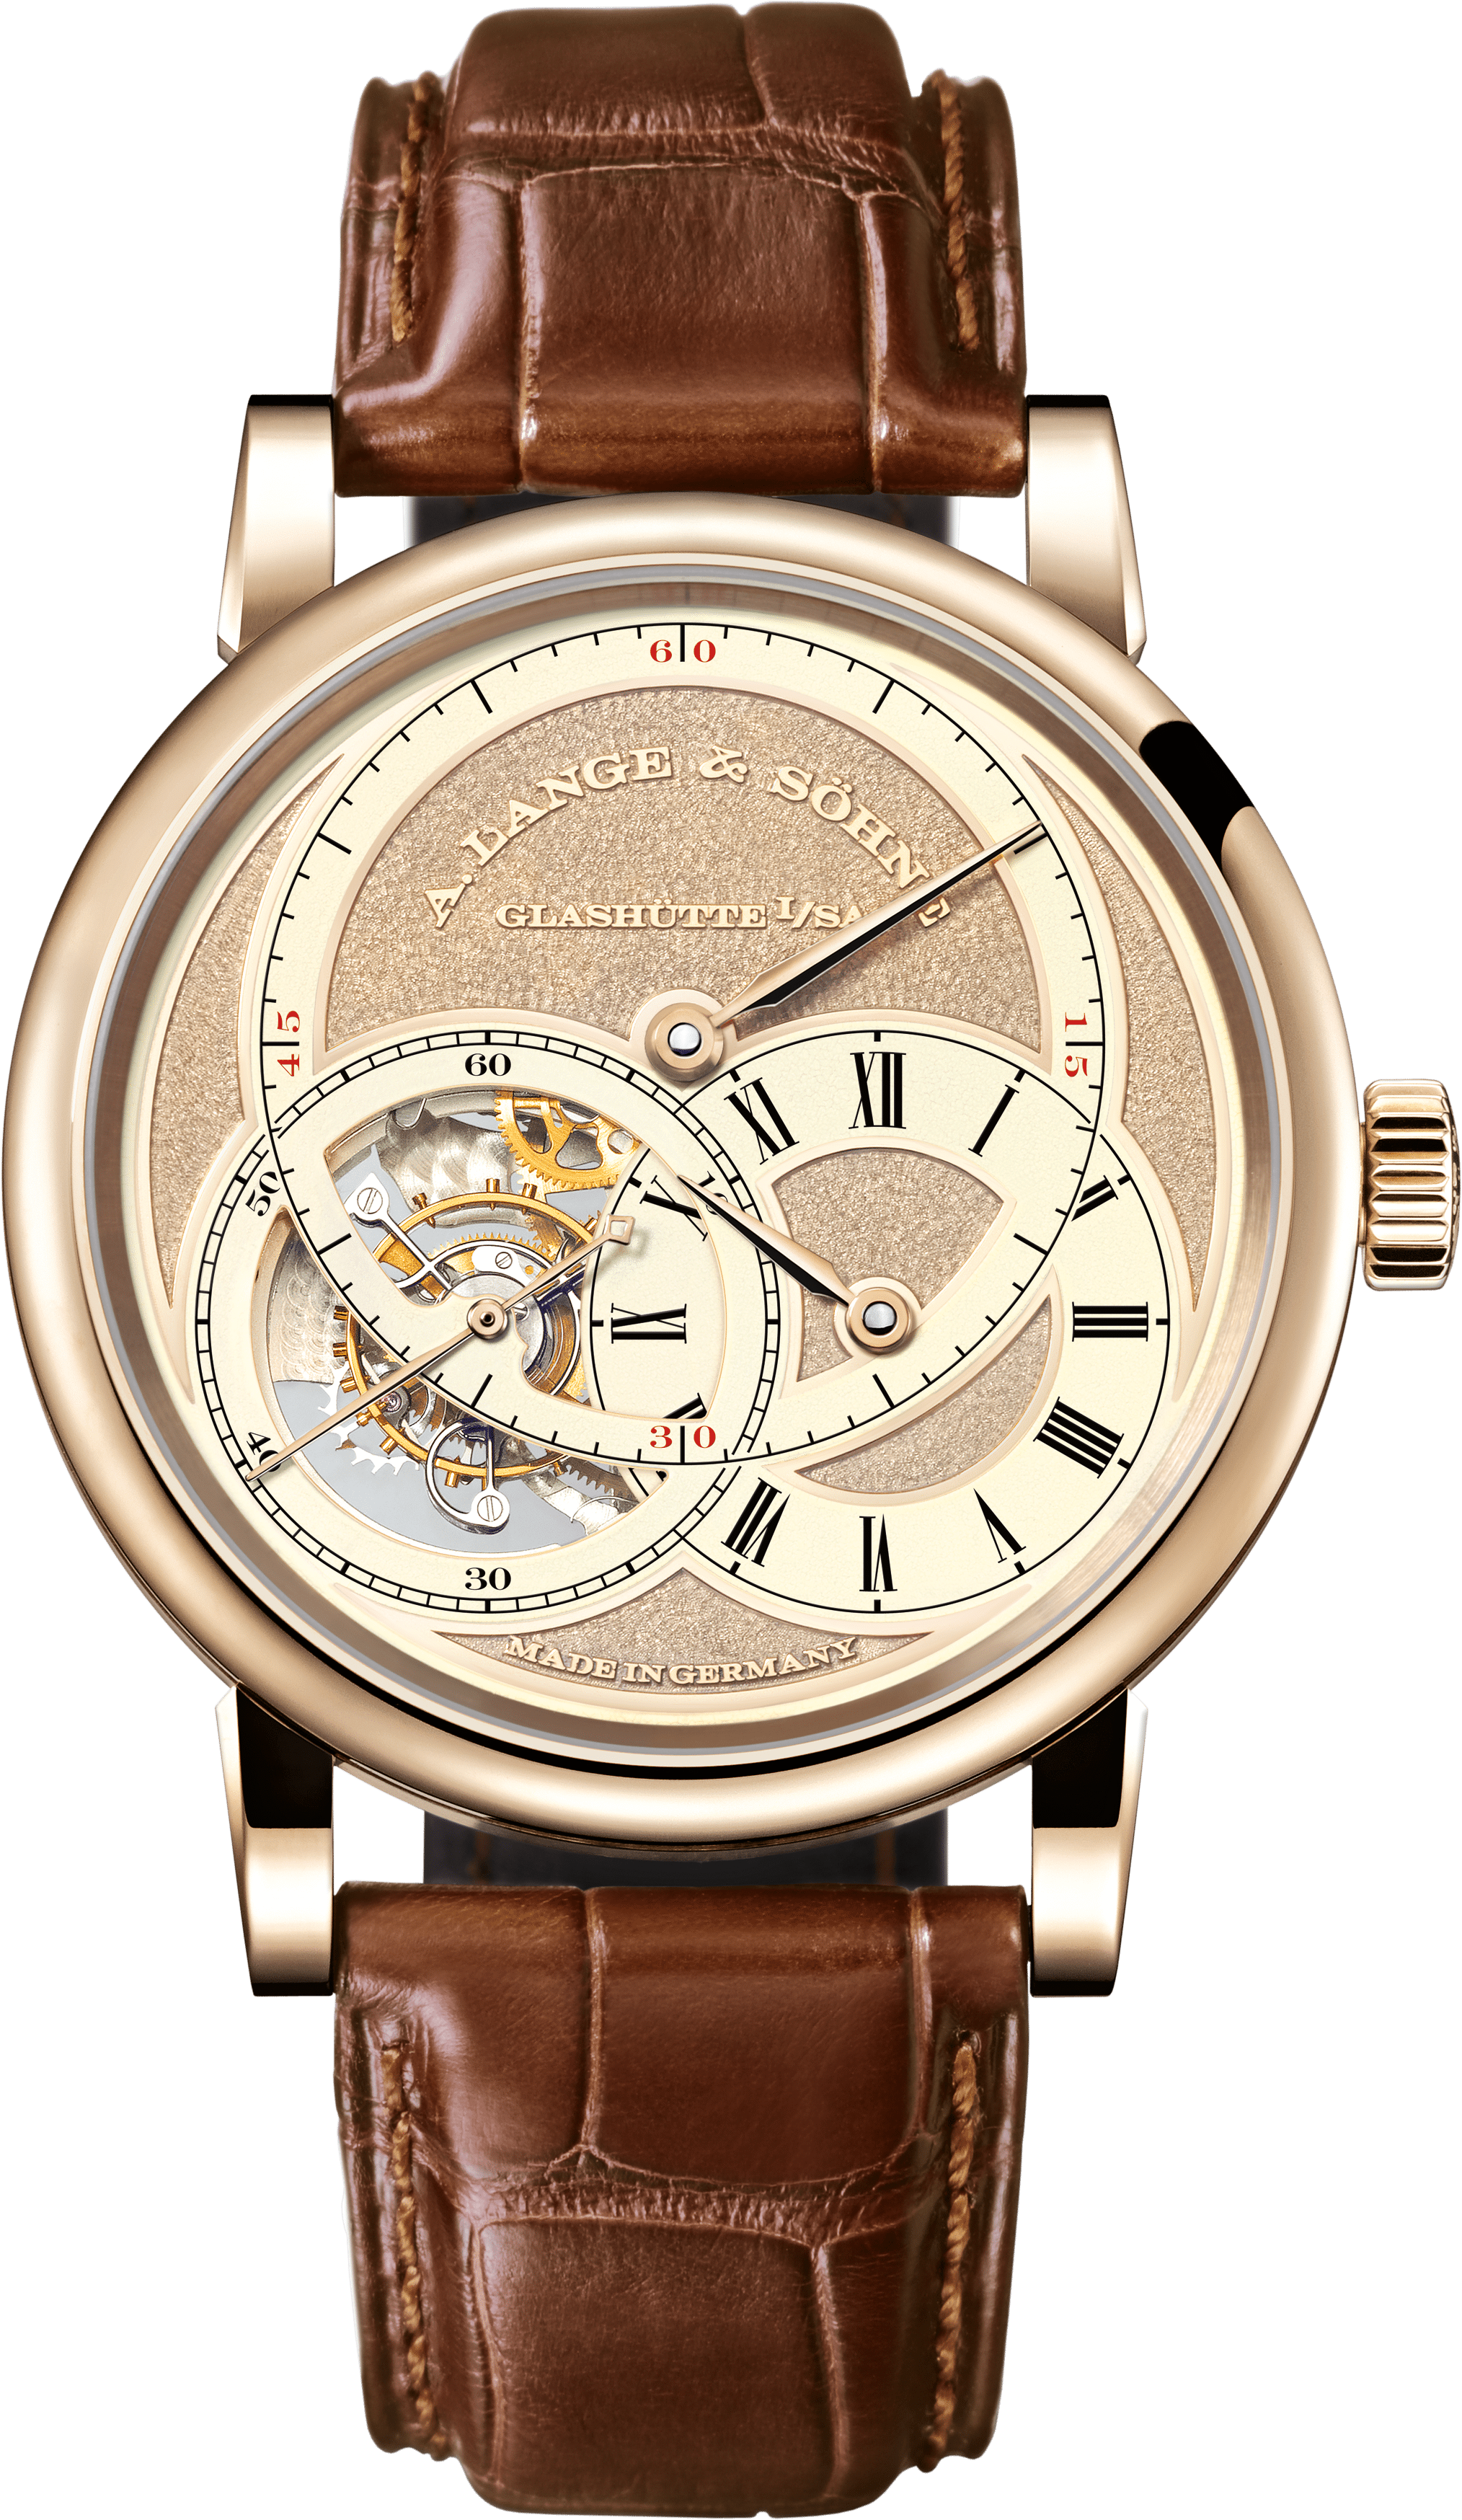 Paul Picot Replications Watches